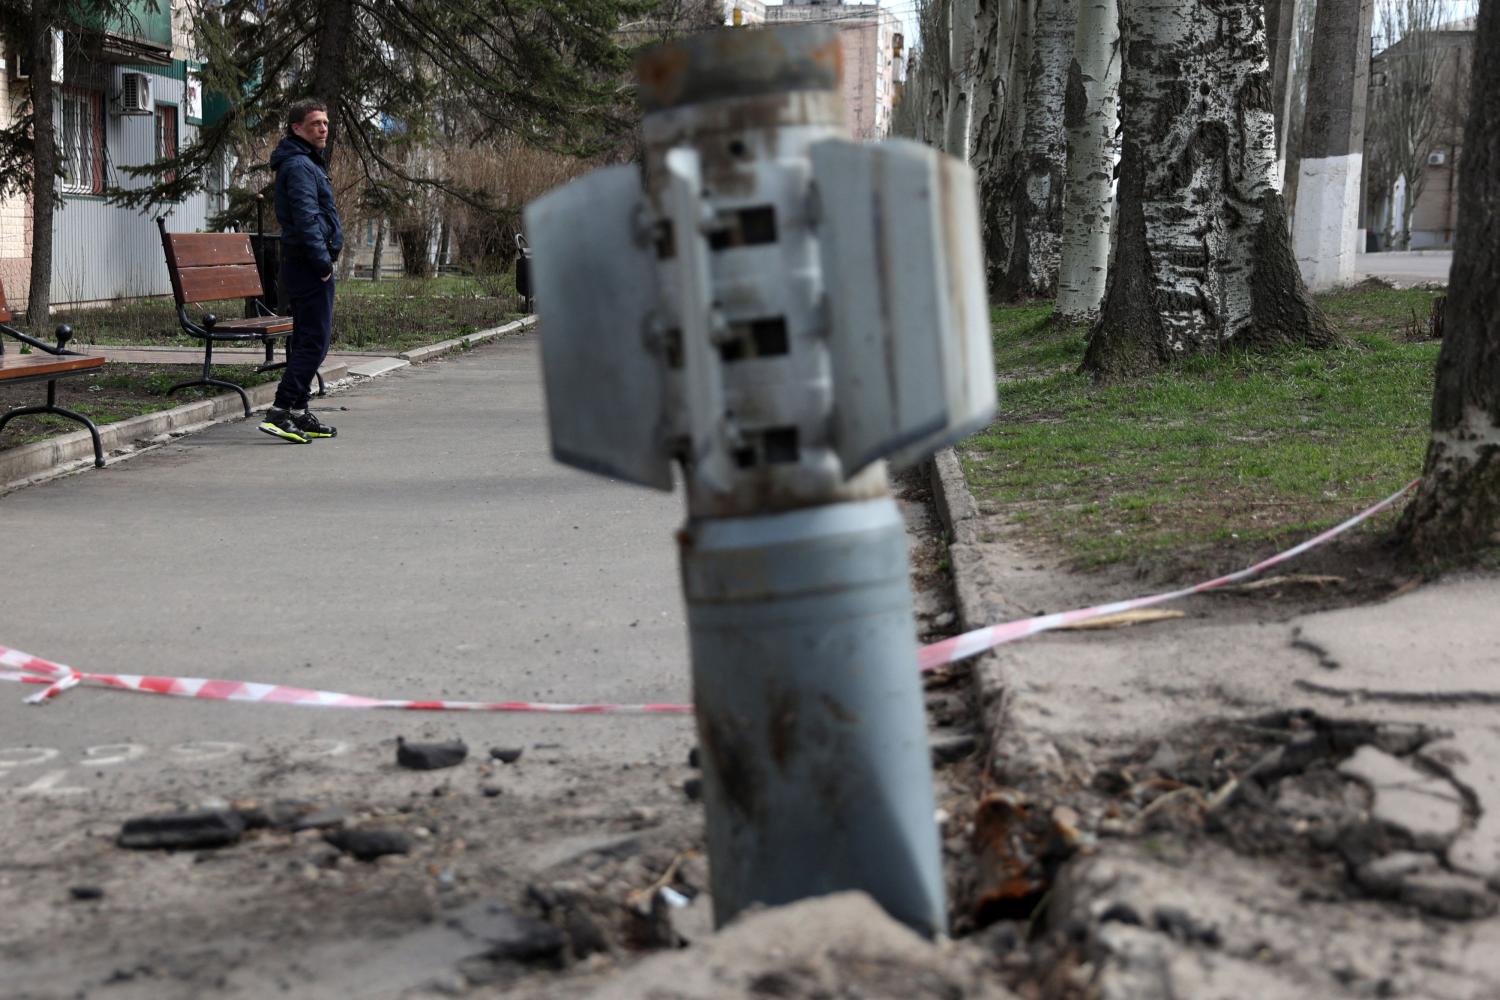 The unexploded tail section of a 300mm rocket which appeared to contain cluster bombs after shelling in Lysychansk, Ukraine, in April (Anatolii Stepanov/AFP via Getty Images)